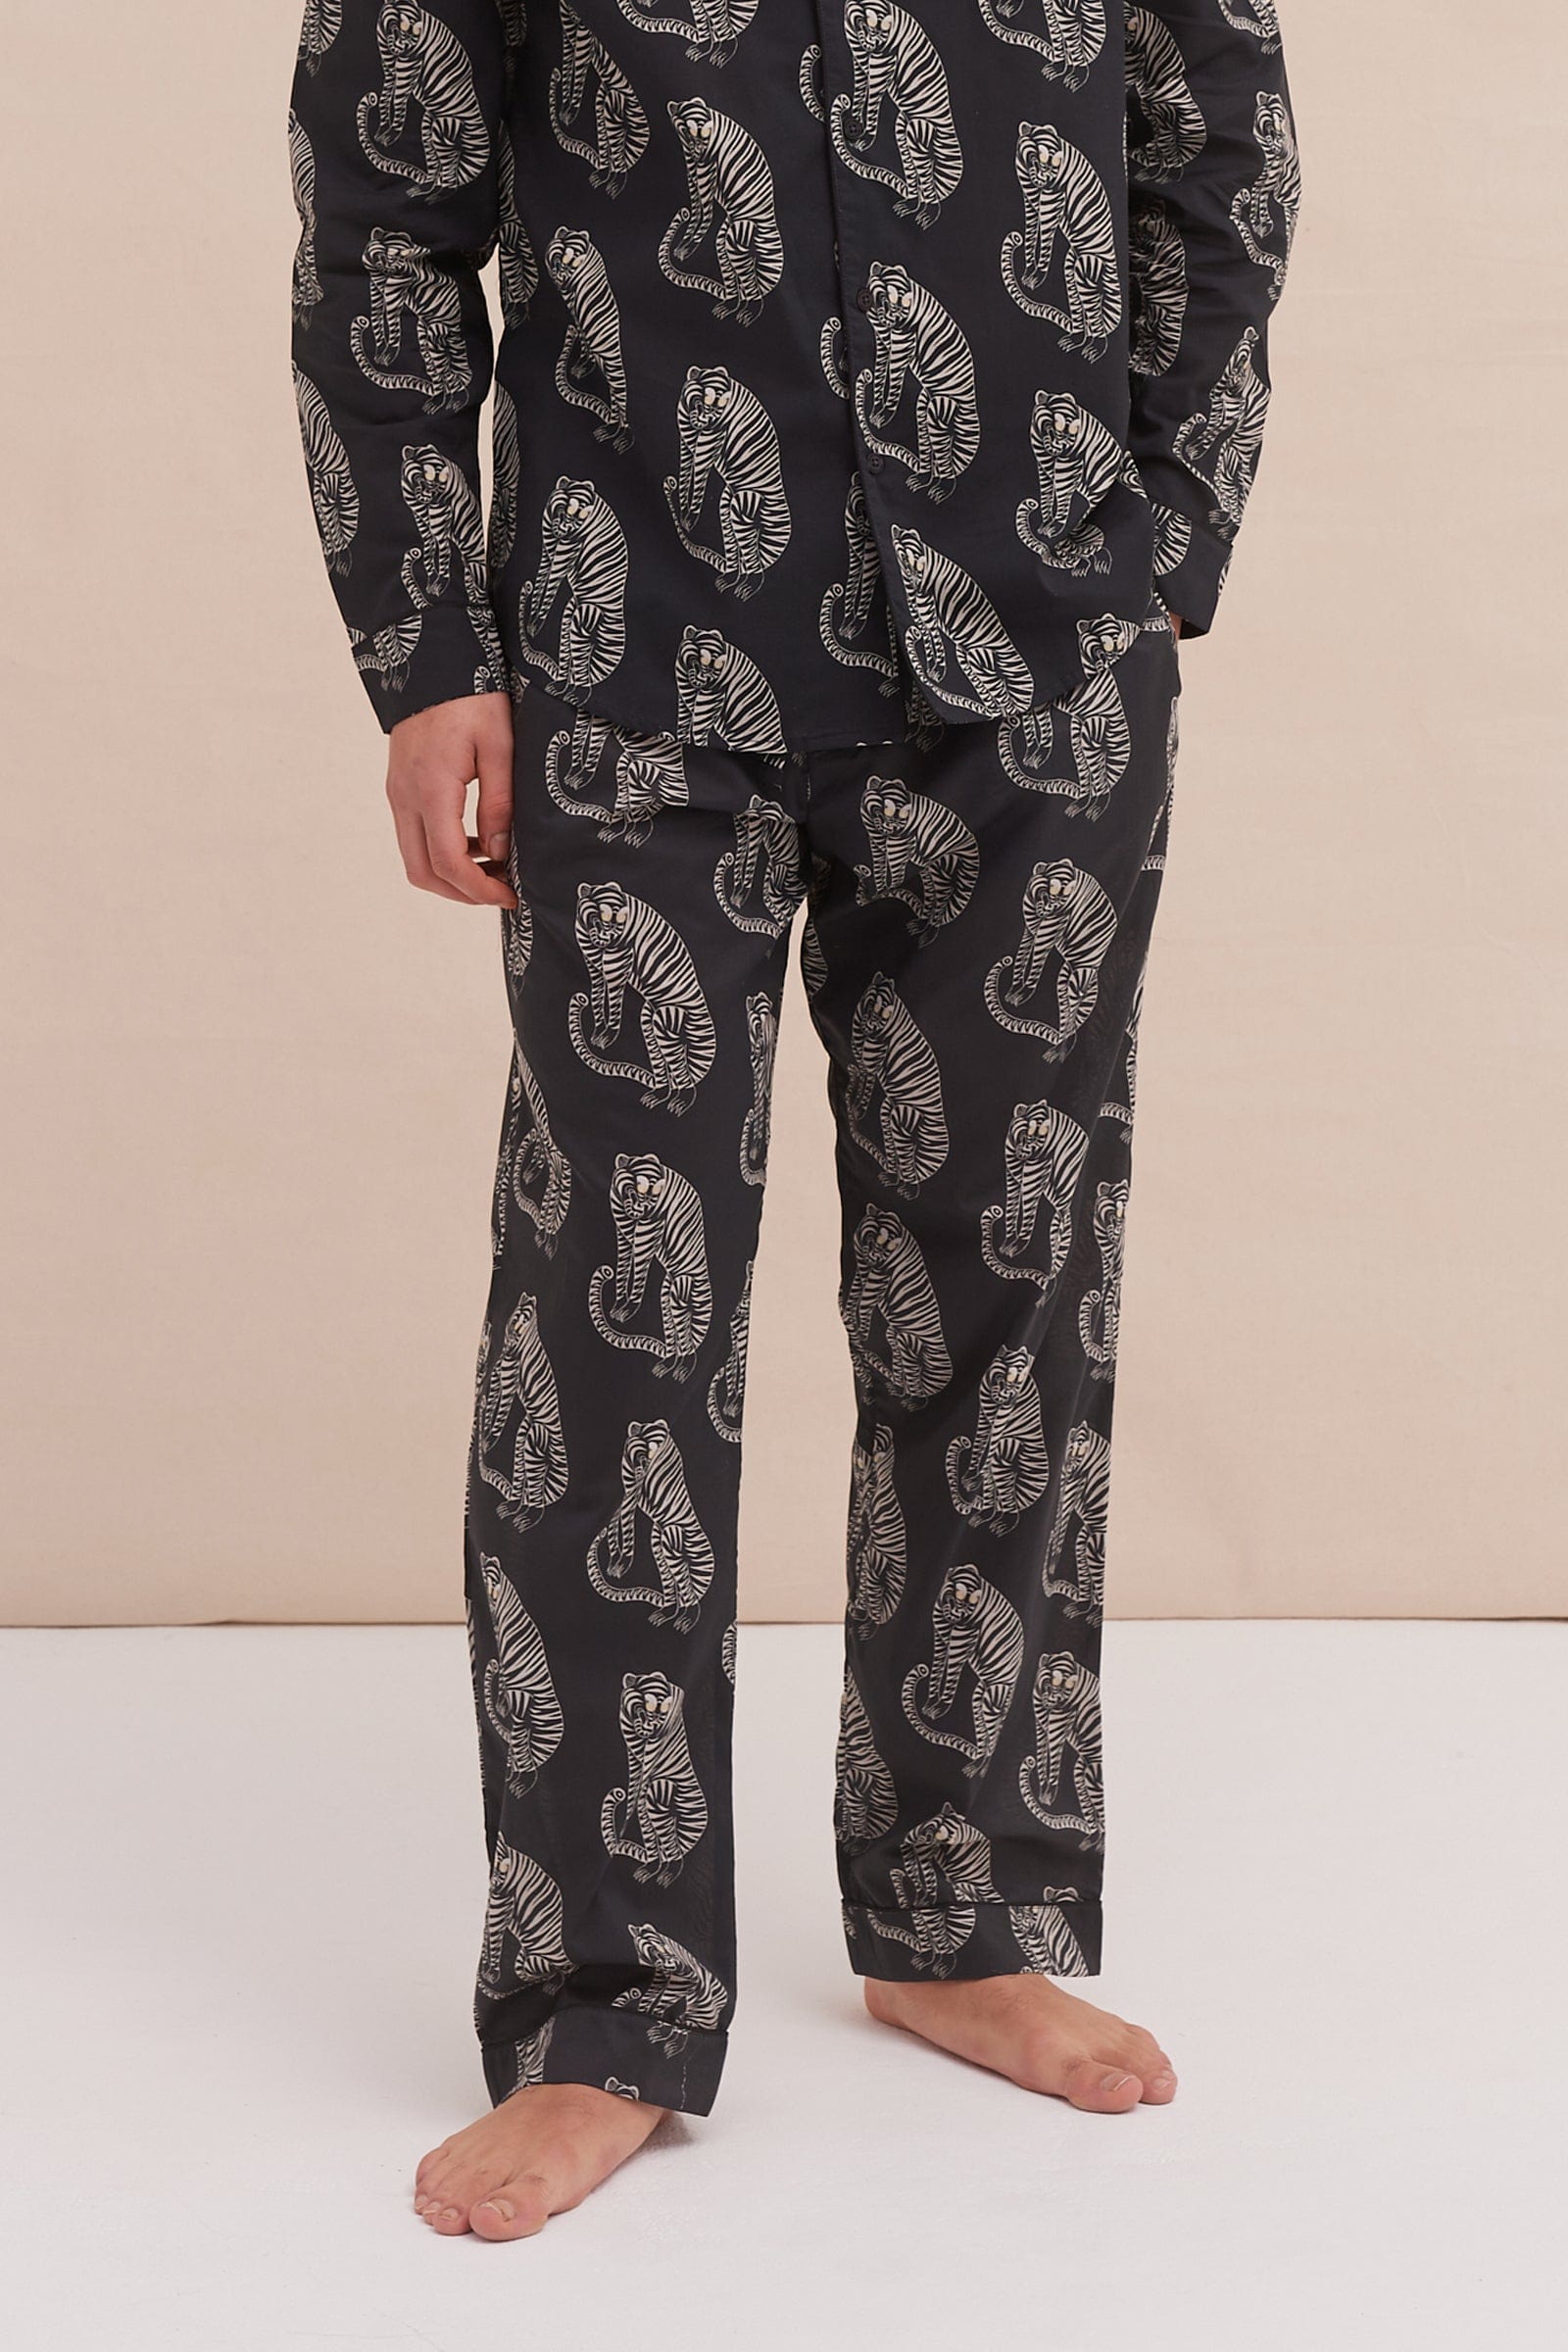 Mens Lounge Trousers | KnickersBoxersGlory